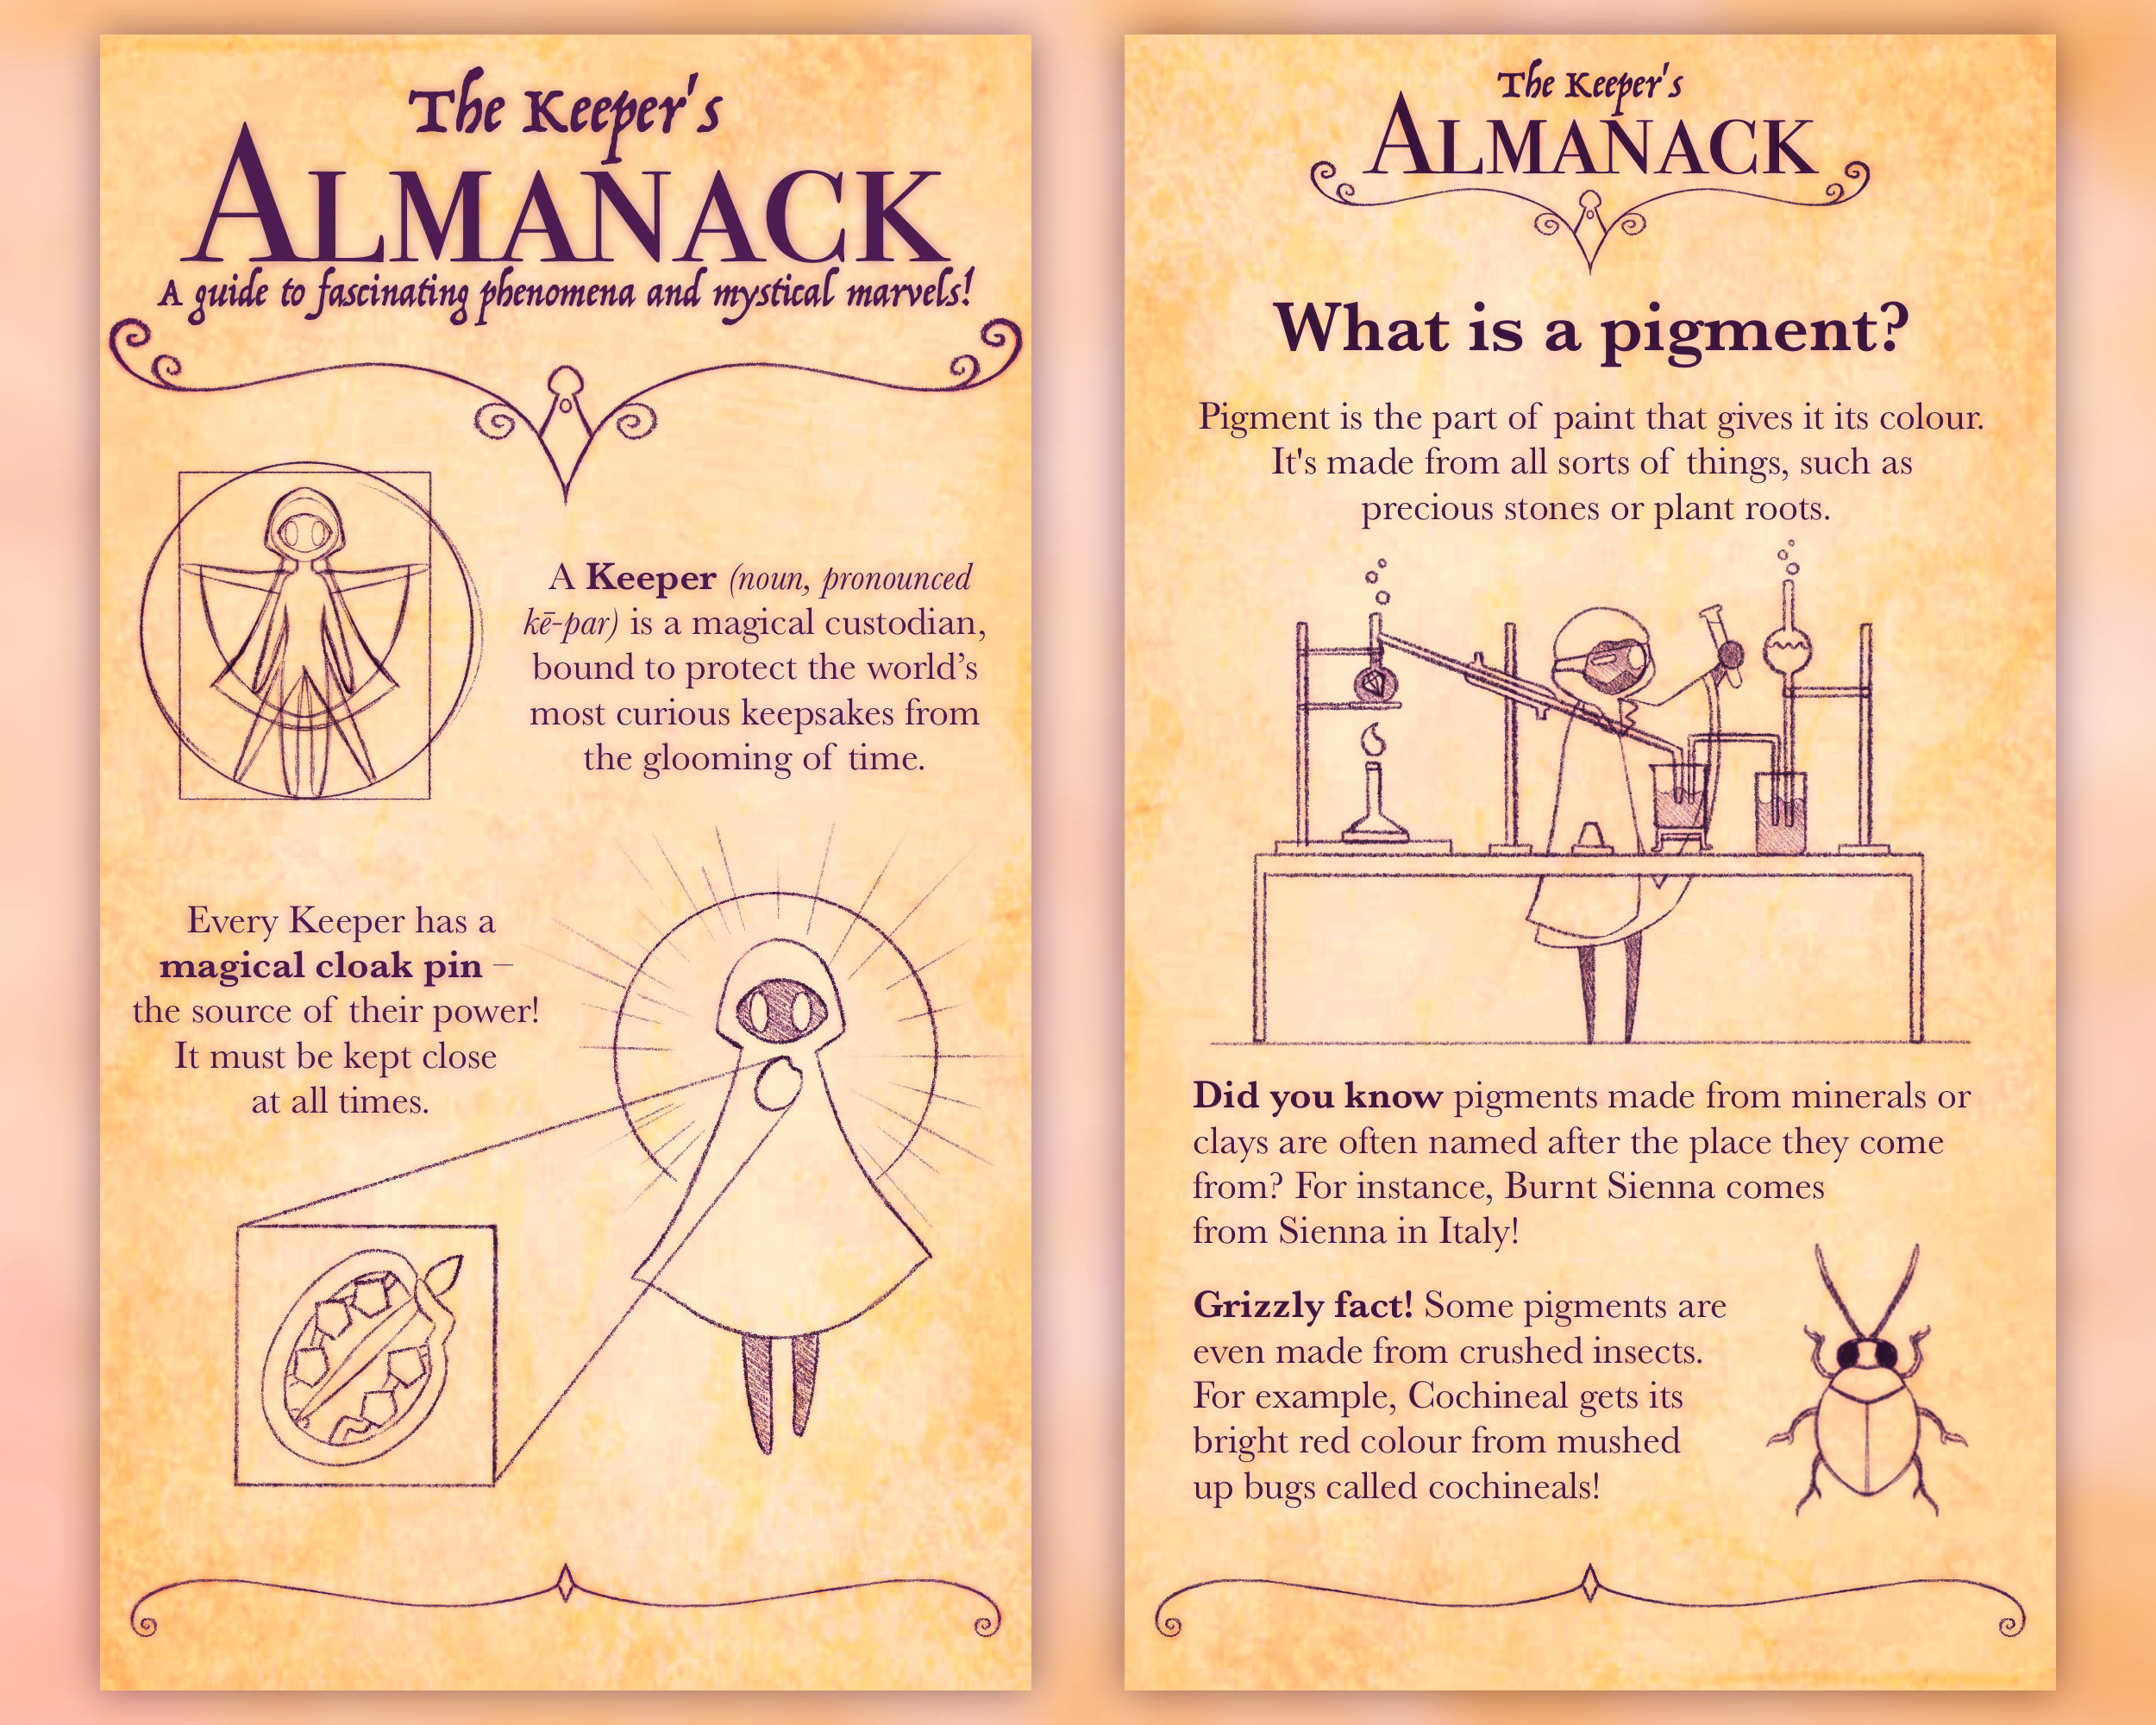 The Keeper's Almanack, page 1 and 2.